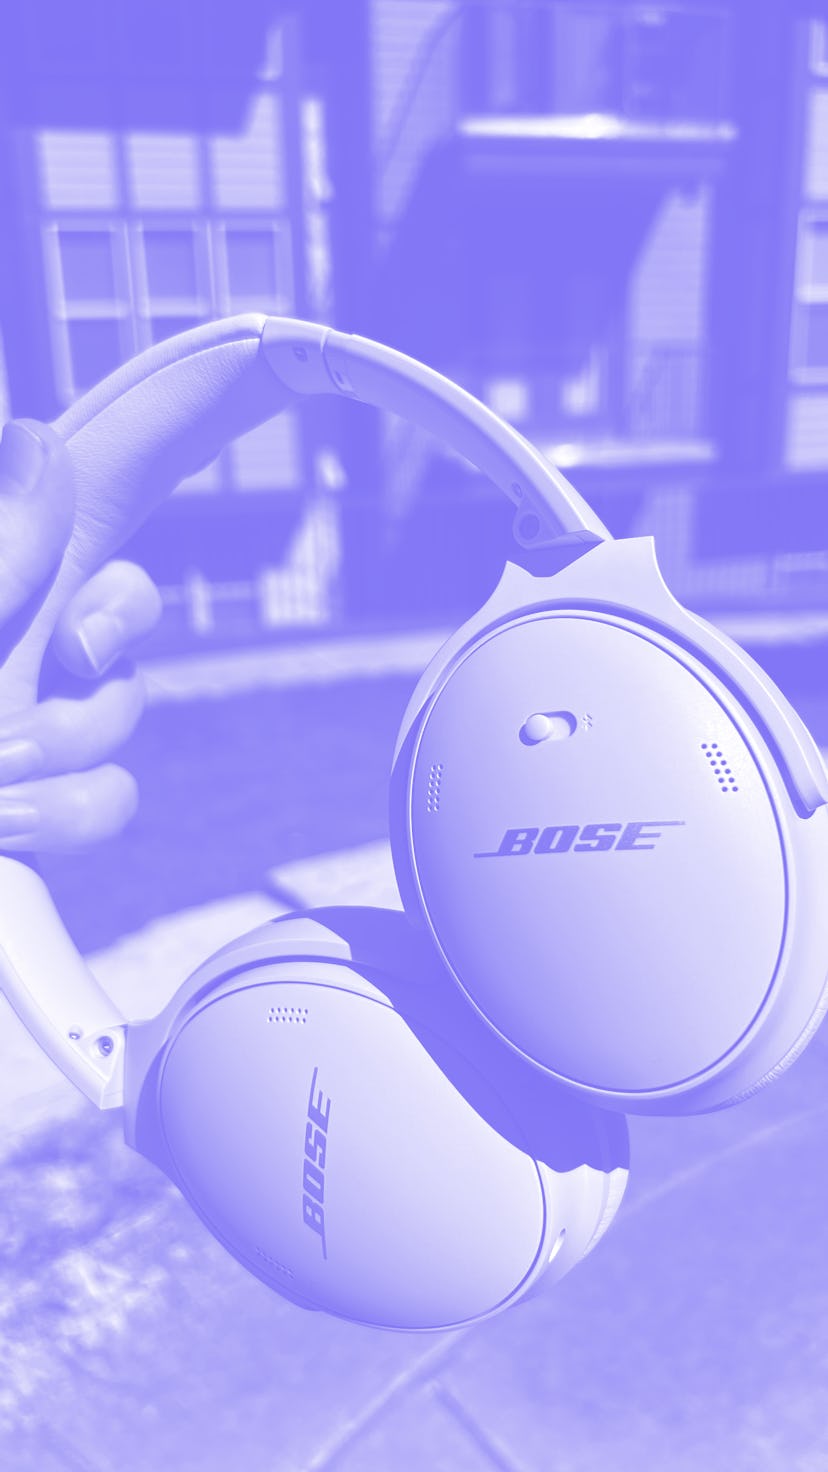 Bose Quiet Comfort 45 review: Back to basics, but still behind Sony